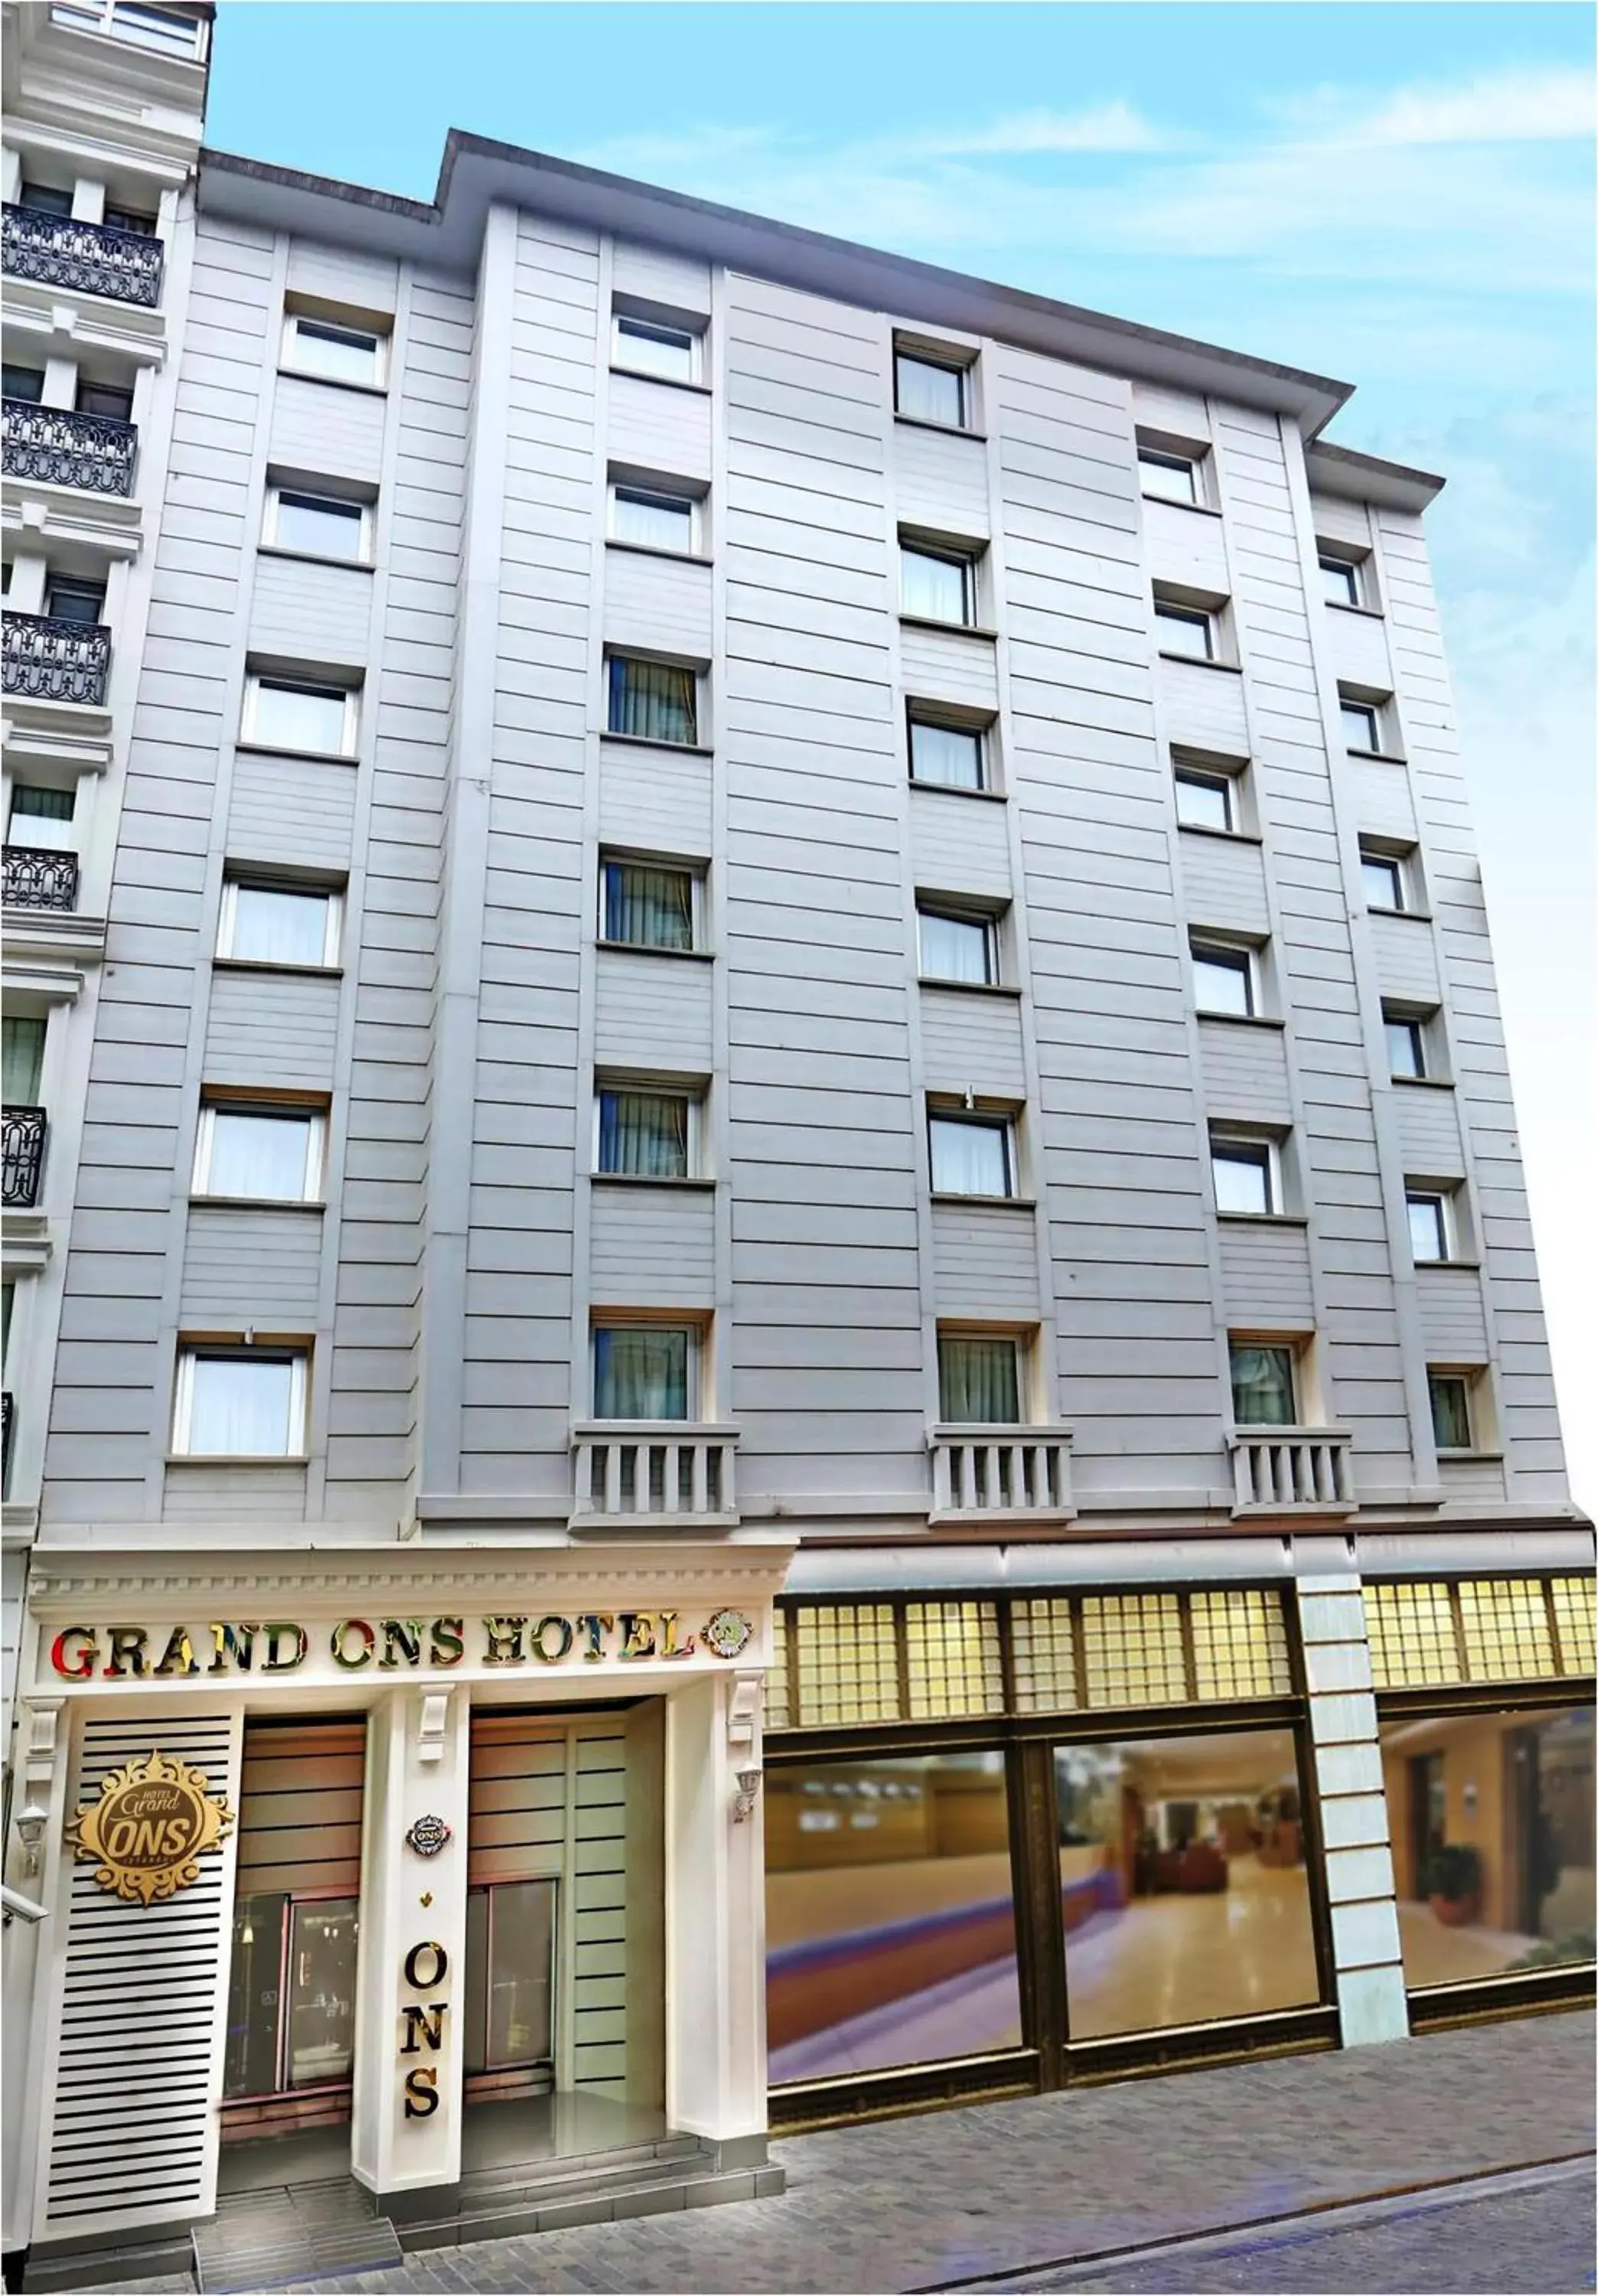 Facade/entrance in Grand Ons Hotel